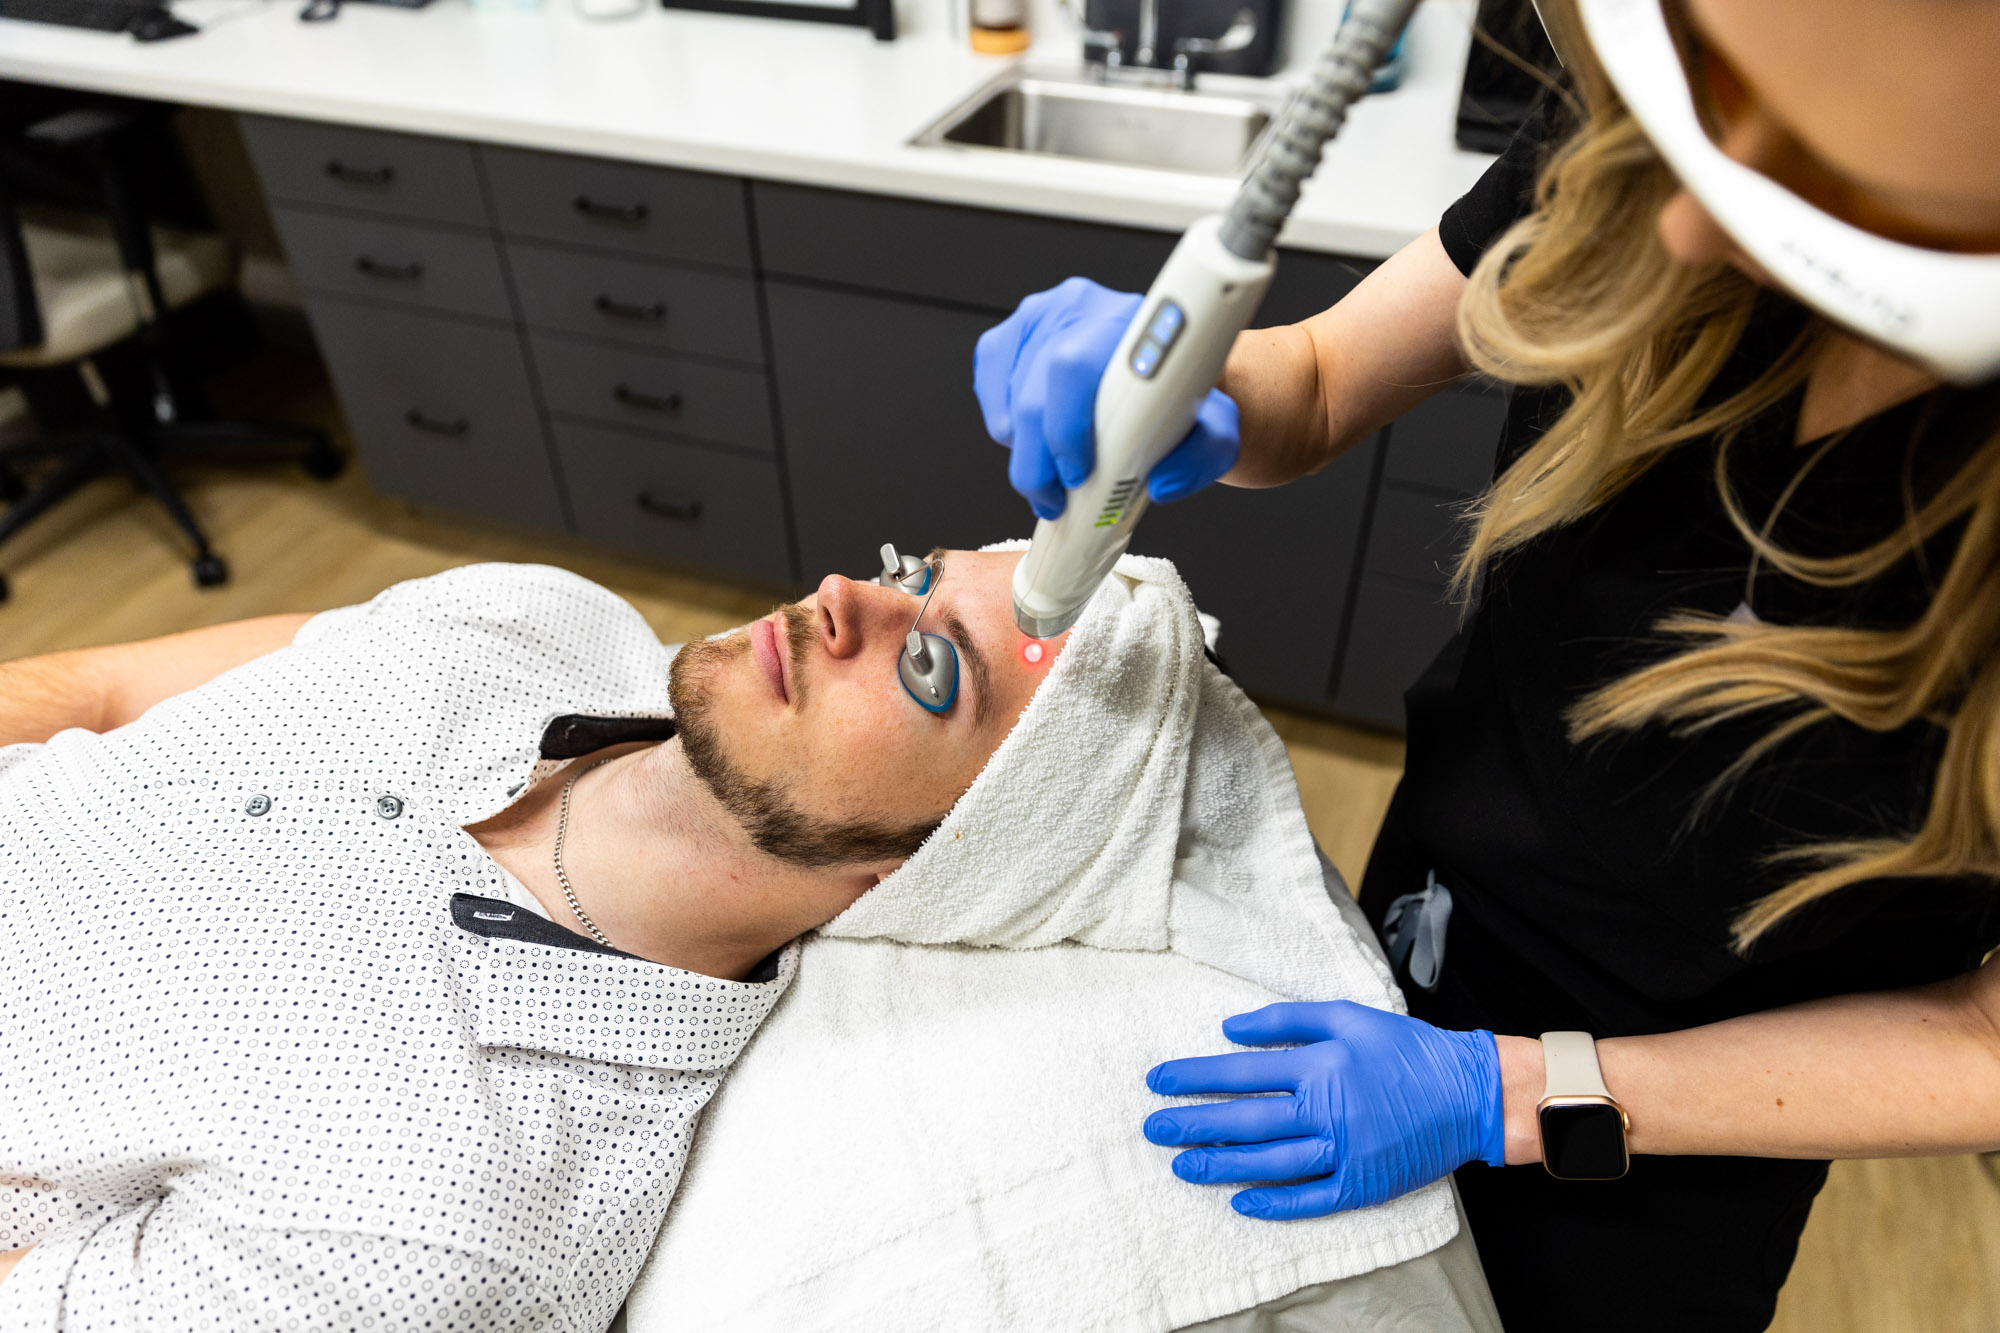 A female medical provider holds the Laser Genesis tool over a male client's forehead. He's wearing protective eye coverings and a towel over his hair. The medical provider is wearing protective sunglasses. The image is taken from above.